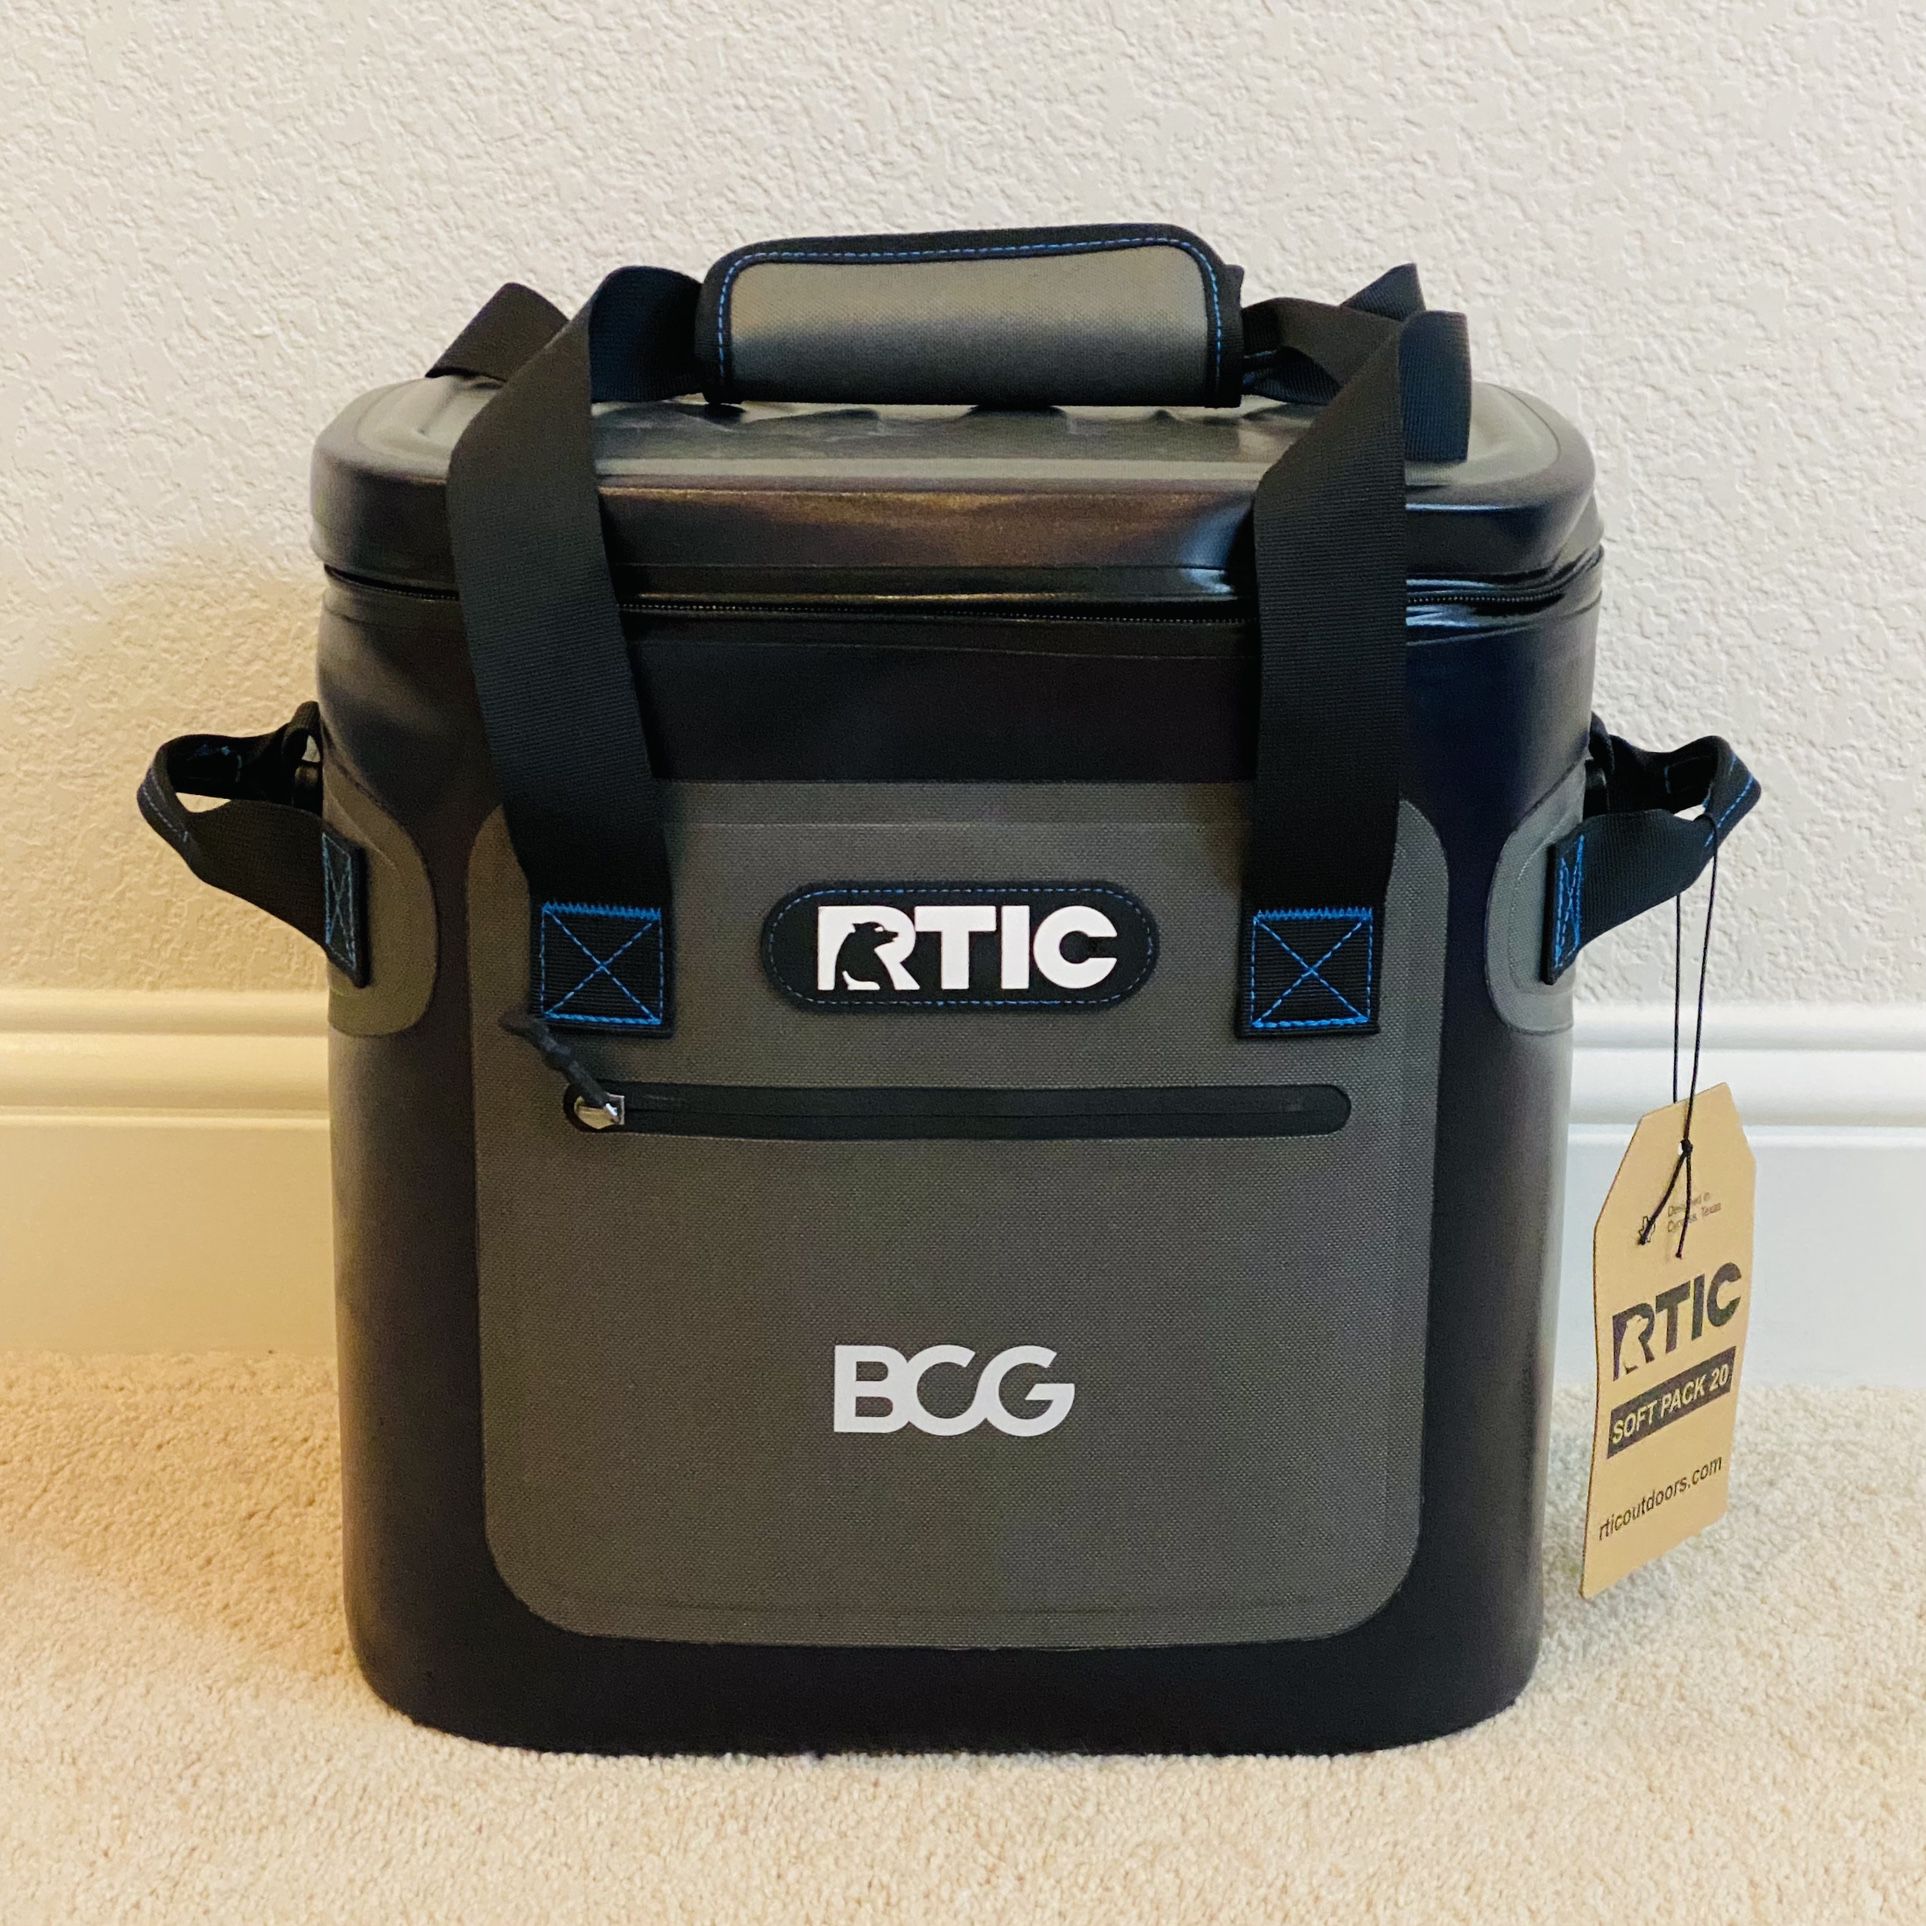 RTIC soft pack cooler